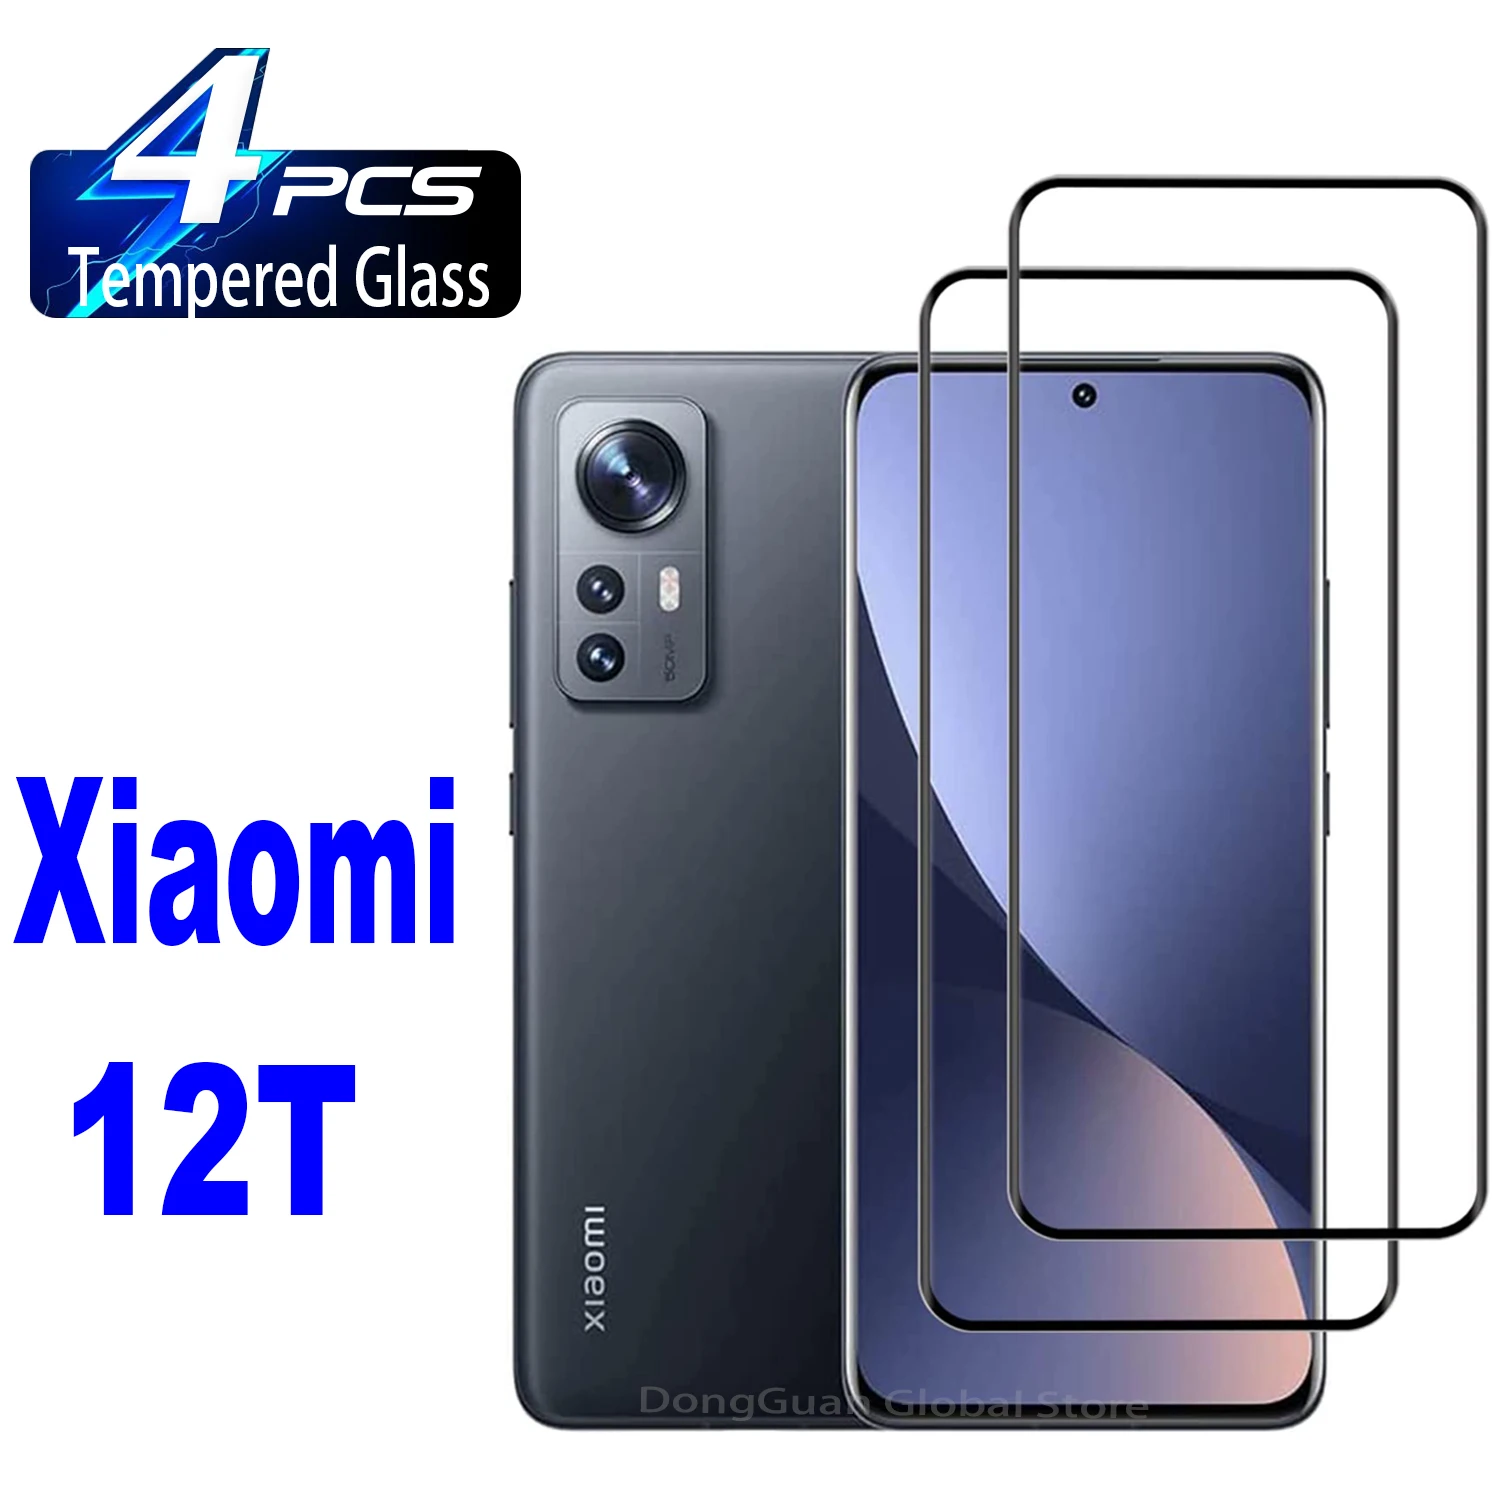 2/4Pcs Tempered Glass For Xiaomi 12T Pro Screen Protector Glass Film for xiaomi mi mix 2 2s screen protector tempered glass 9h hardness full cover glass film for xiaomi mi mix 2 2s mix2 glass film